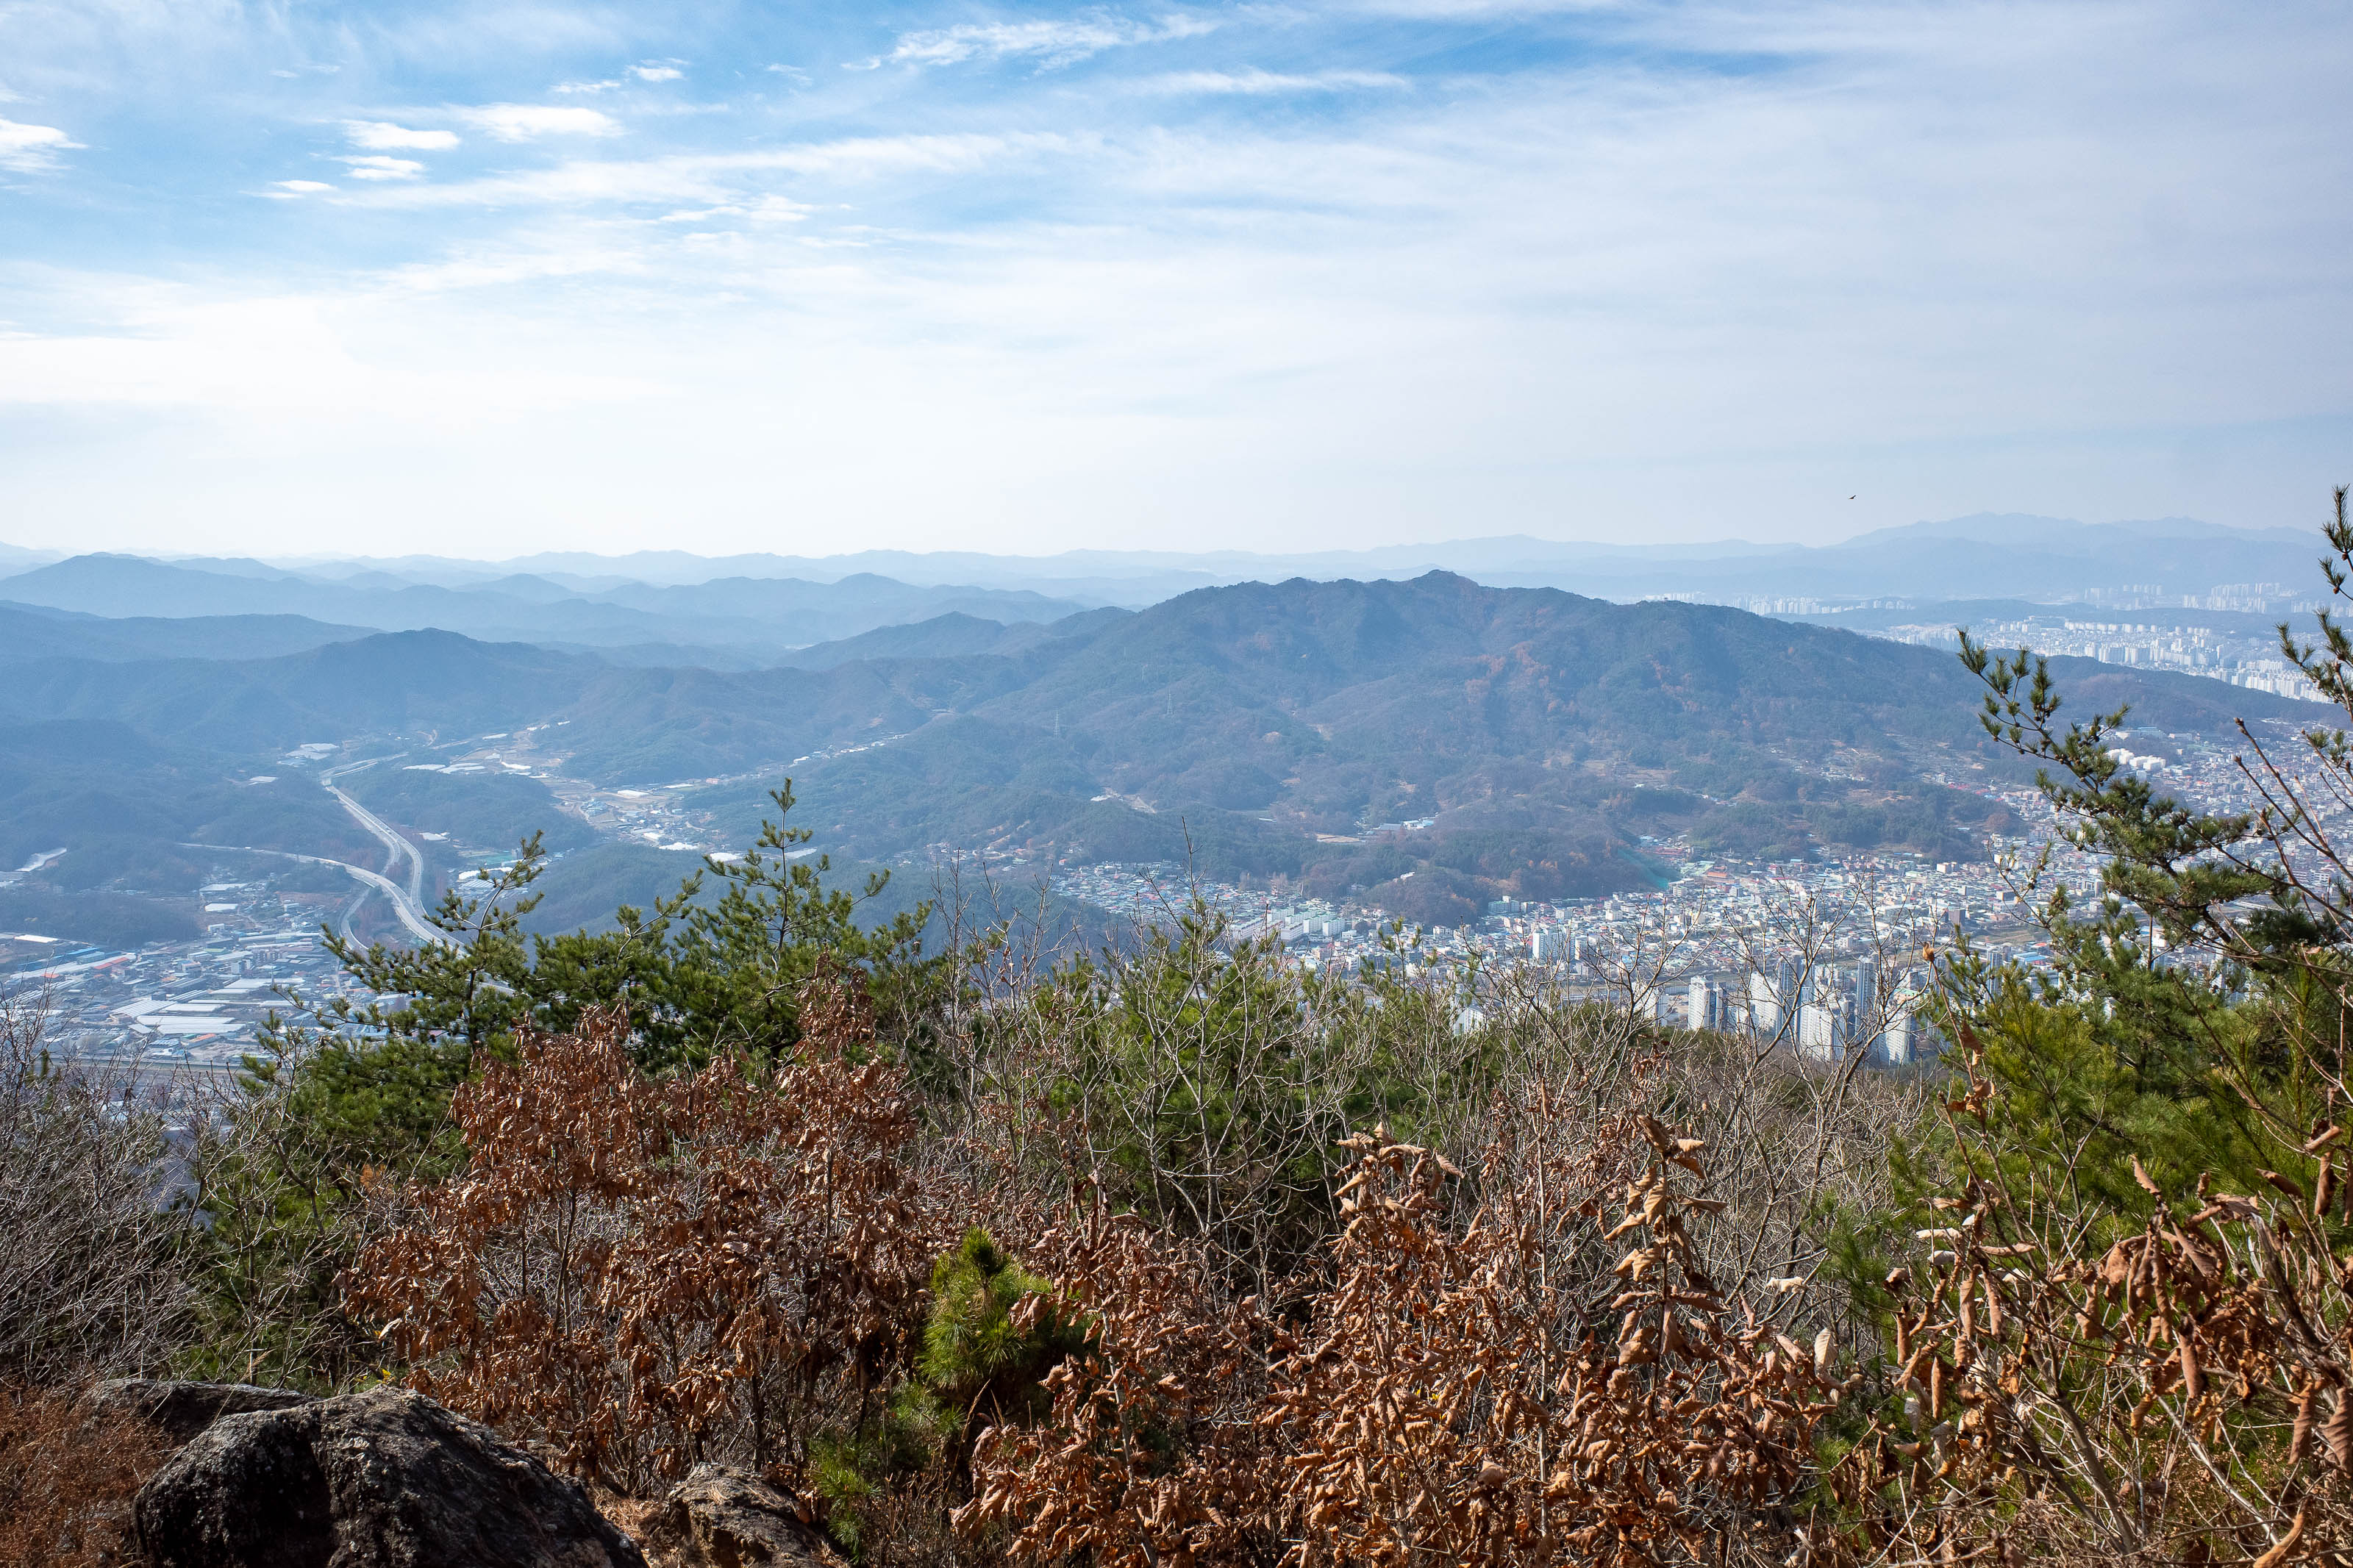 Korean-Hiking-Daejeon-Bomunsan - Getting near the top, that is Bomunsan that I had just come up and down across the way there. I am talking like an old person.